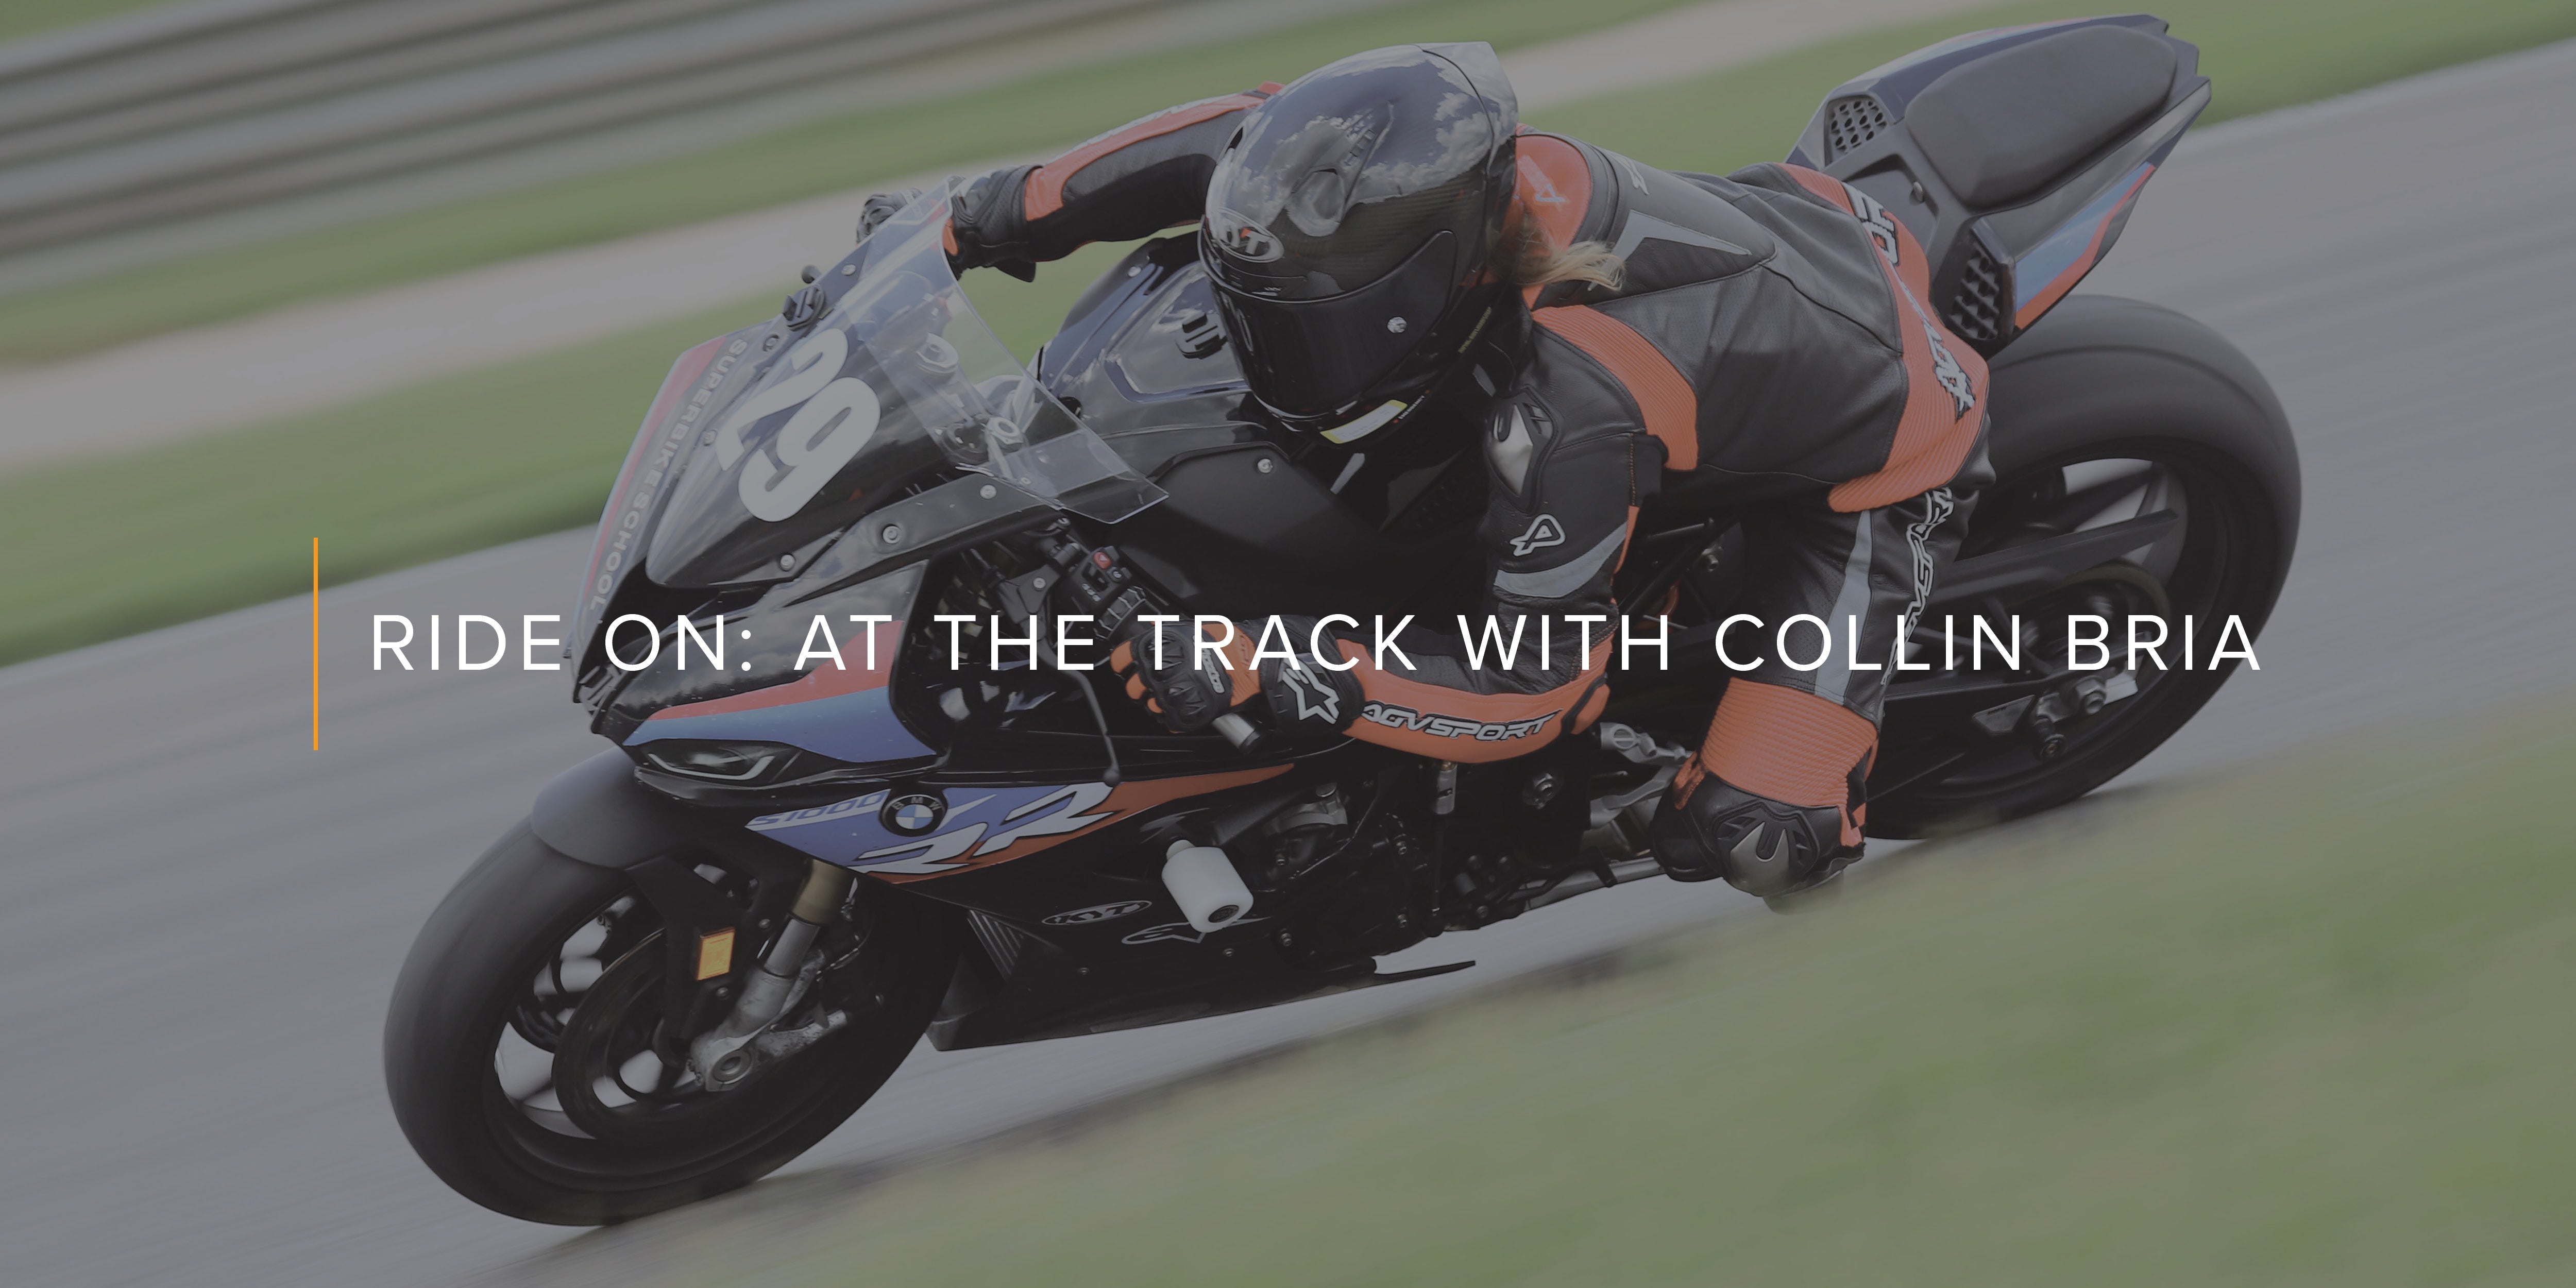 Ride On: At The Track With Collin Bria